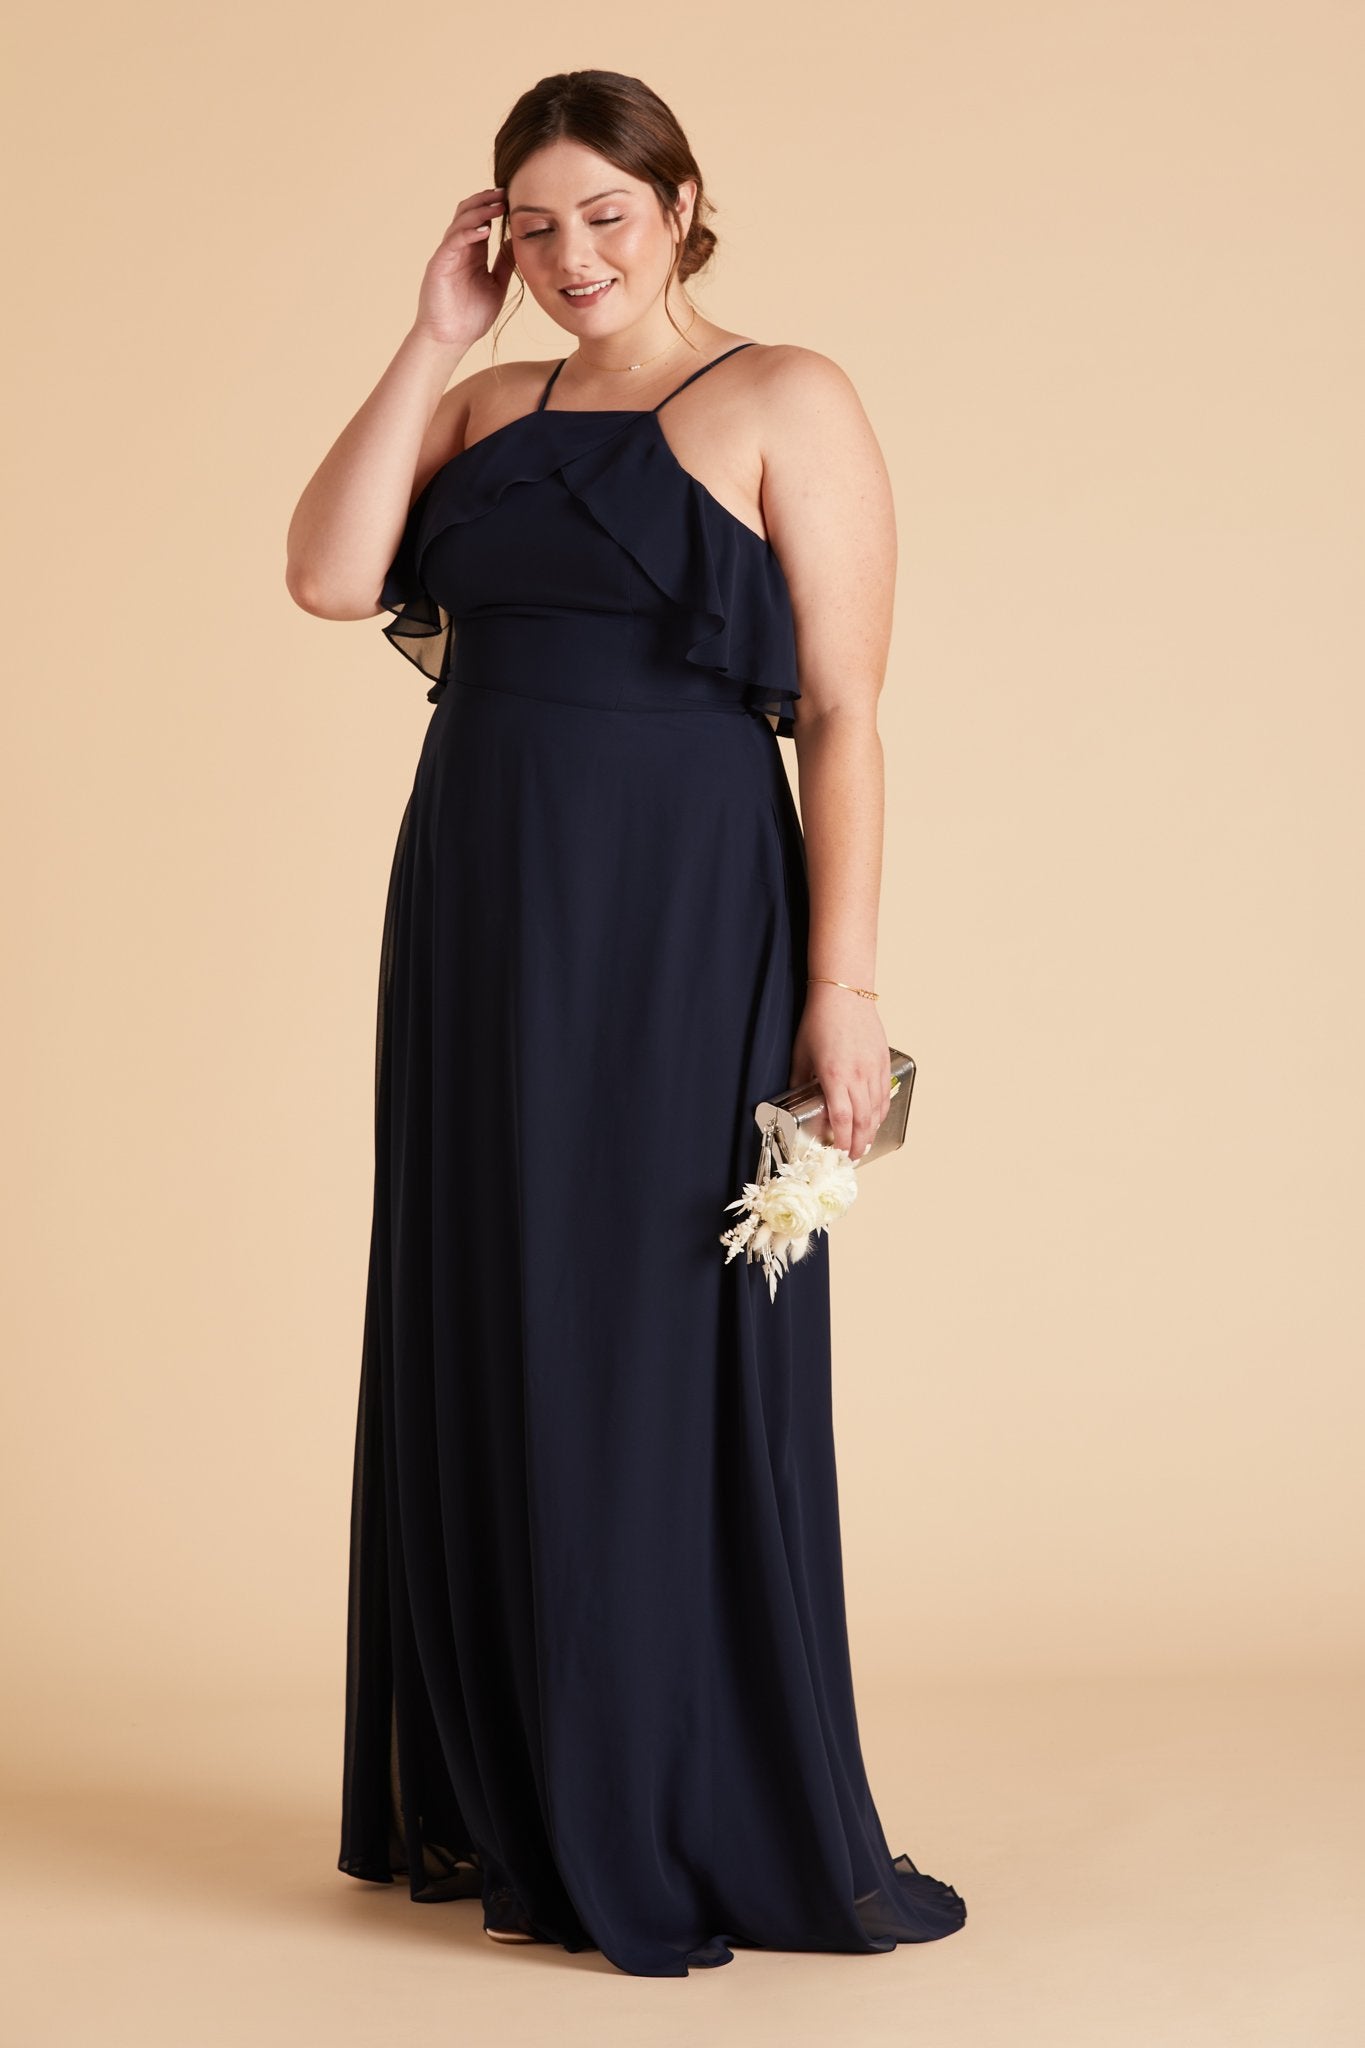 Jules plus size bridesmaid dress in navy blue chiffon by Birdy Grey, front view